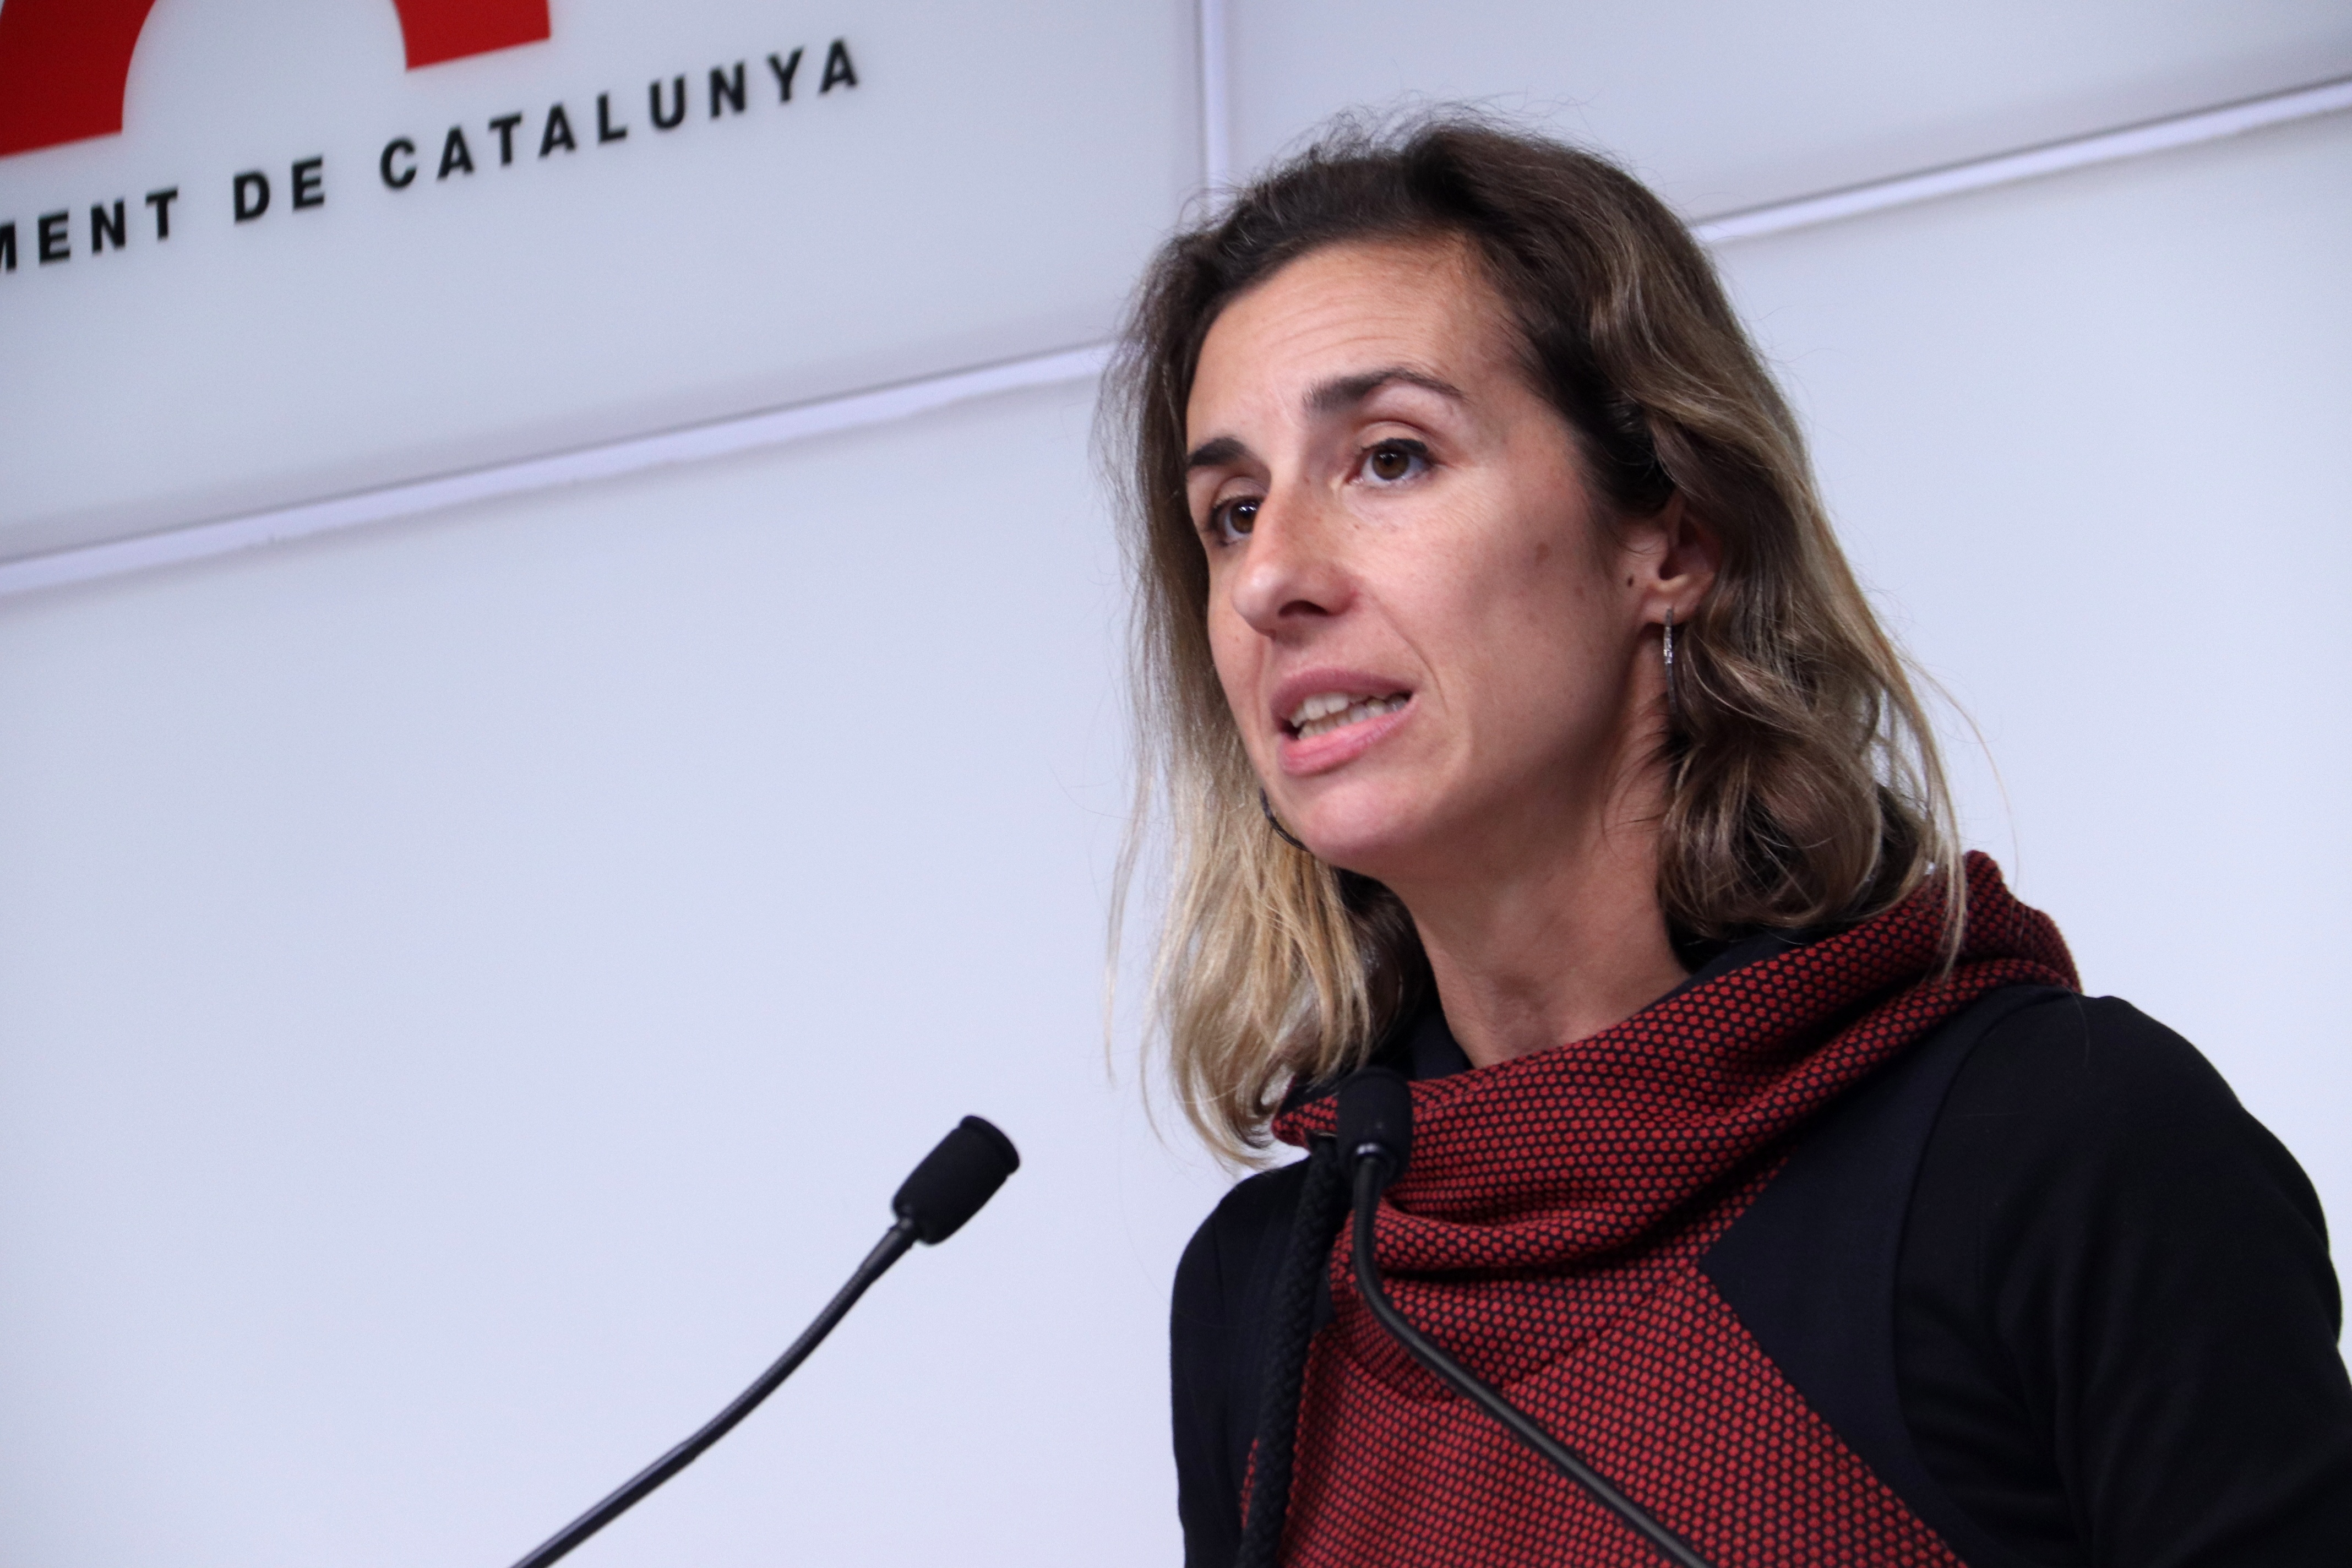 Pro-independence CUP chooses Laia Estrada as candidate for Catalan election on May 12th